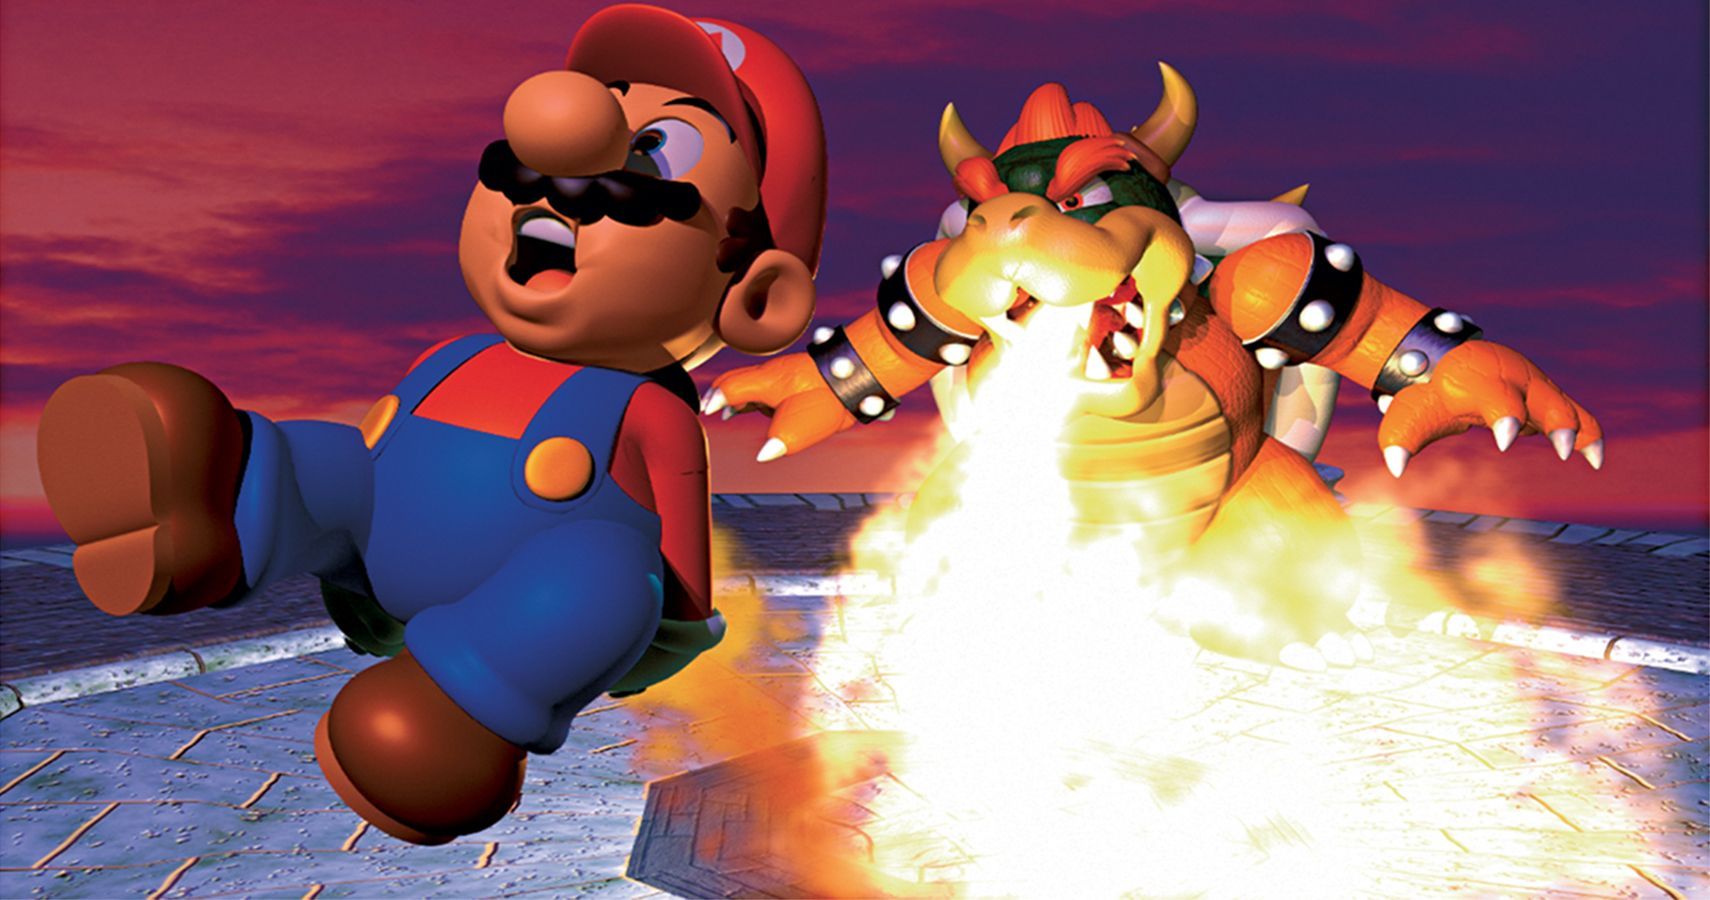 Super Mario 64 is one of the best-selling games of all time - Bowser